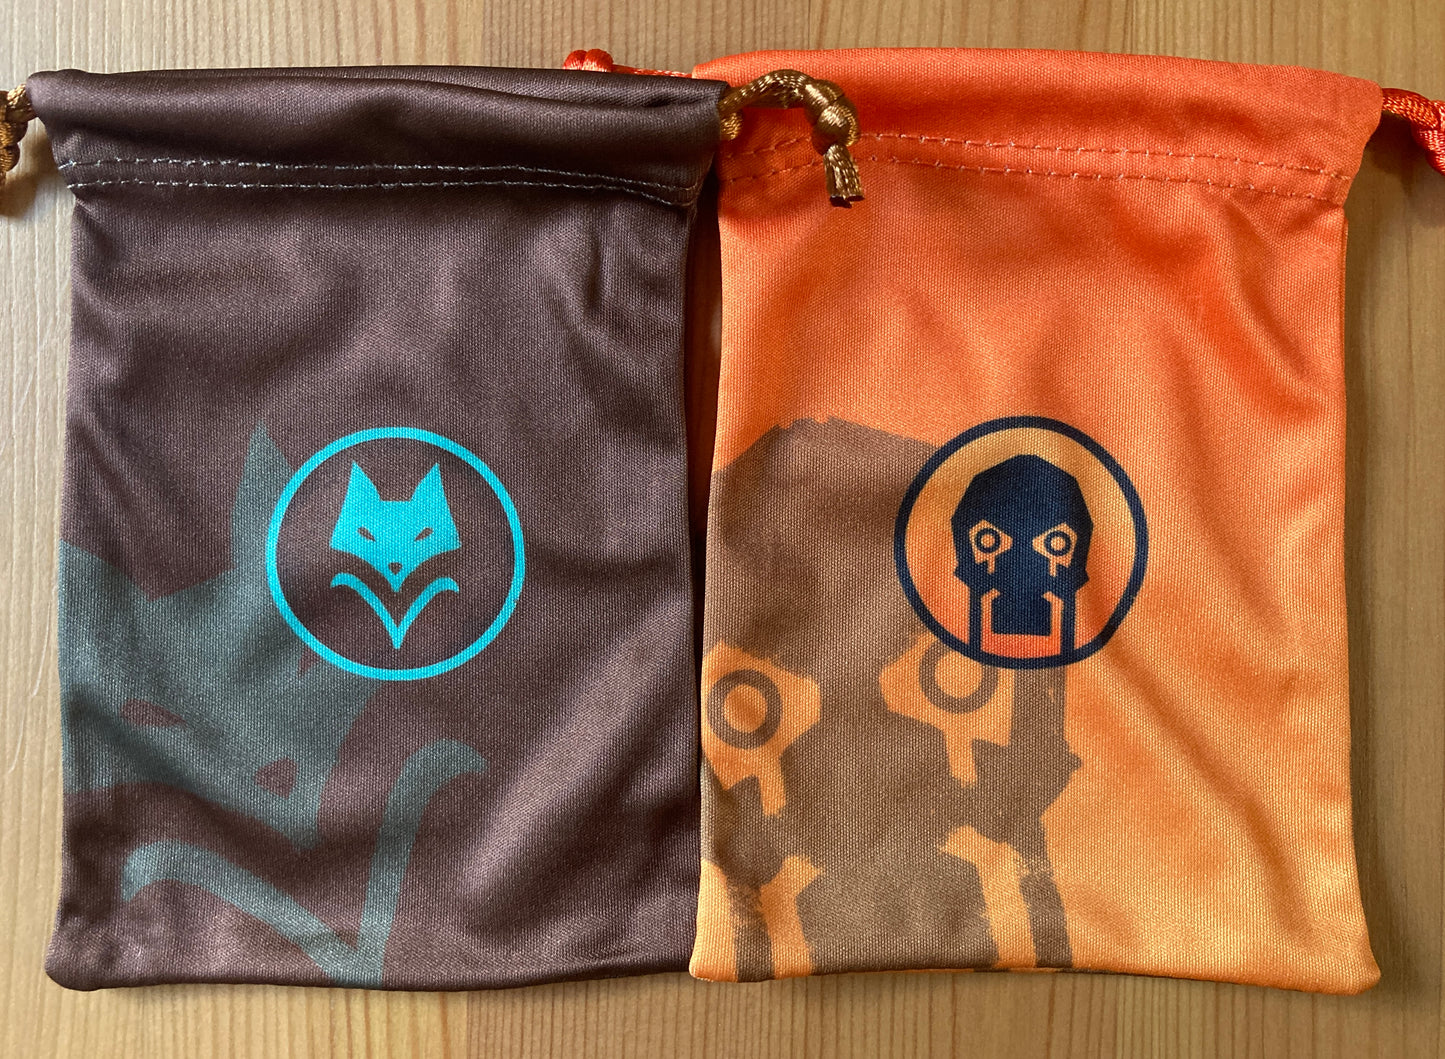 View of the 2 bags that come with this Scythe 2 Rise of Fenris Expansion Bags accessory.